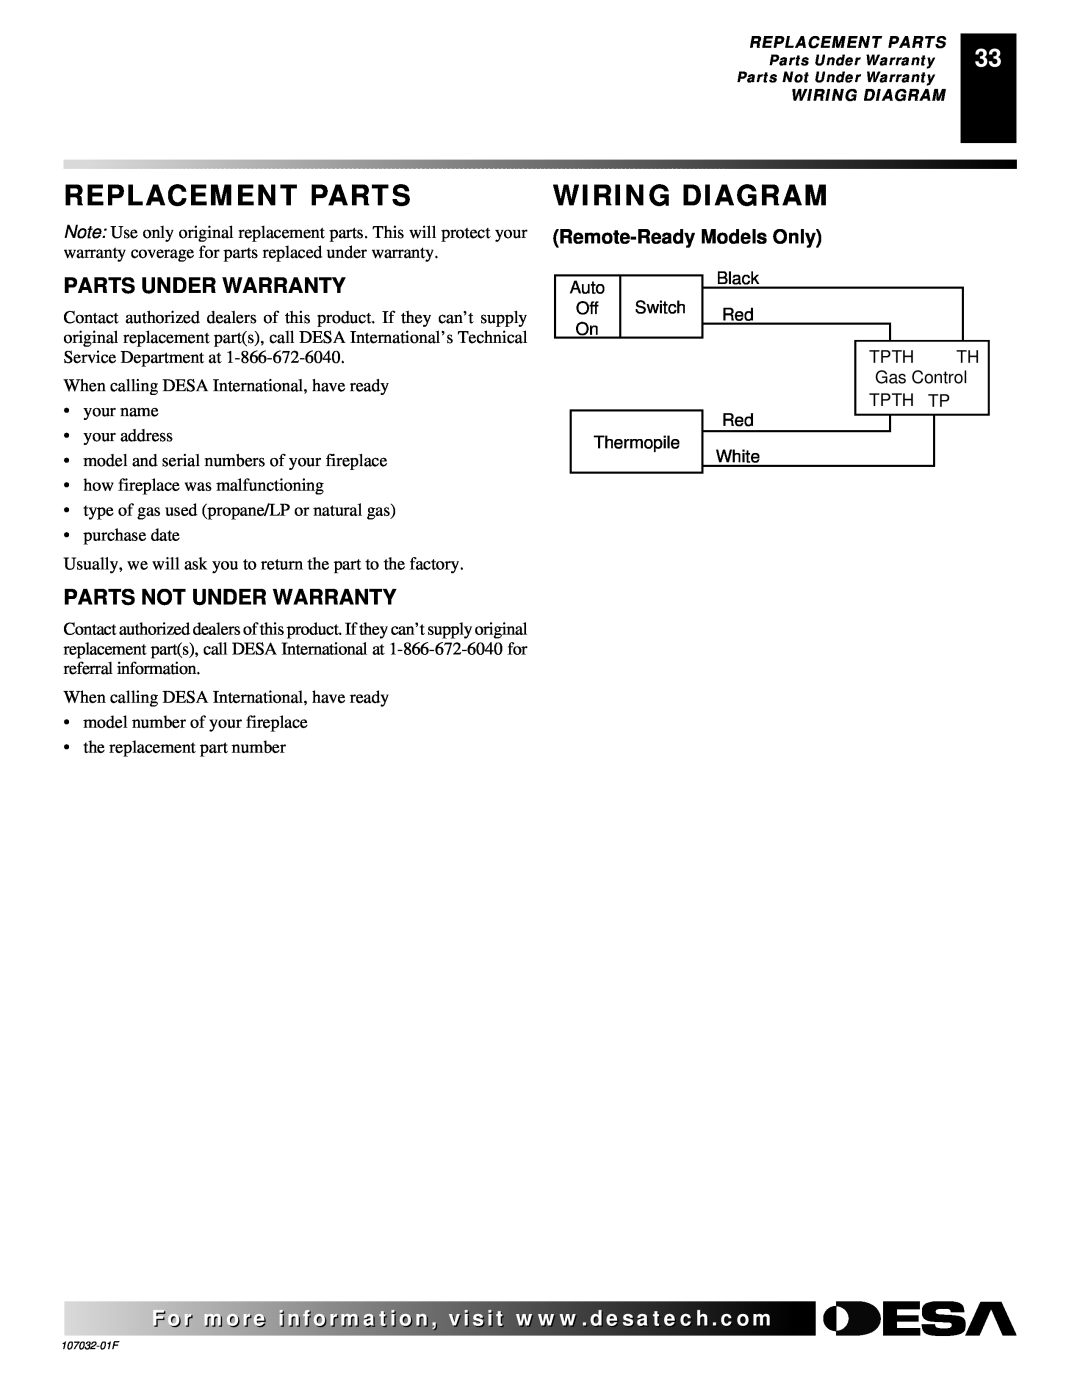 Desa VMH26PRA Replacement Parts, Wiring Diagram, Parts Under Warranty, Parts Not Under Warranty, Remote-ReadyModels Only 